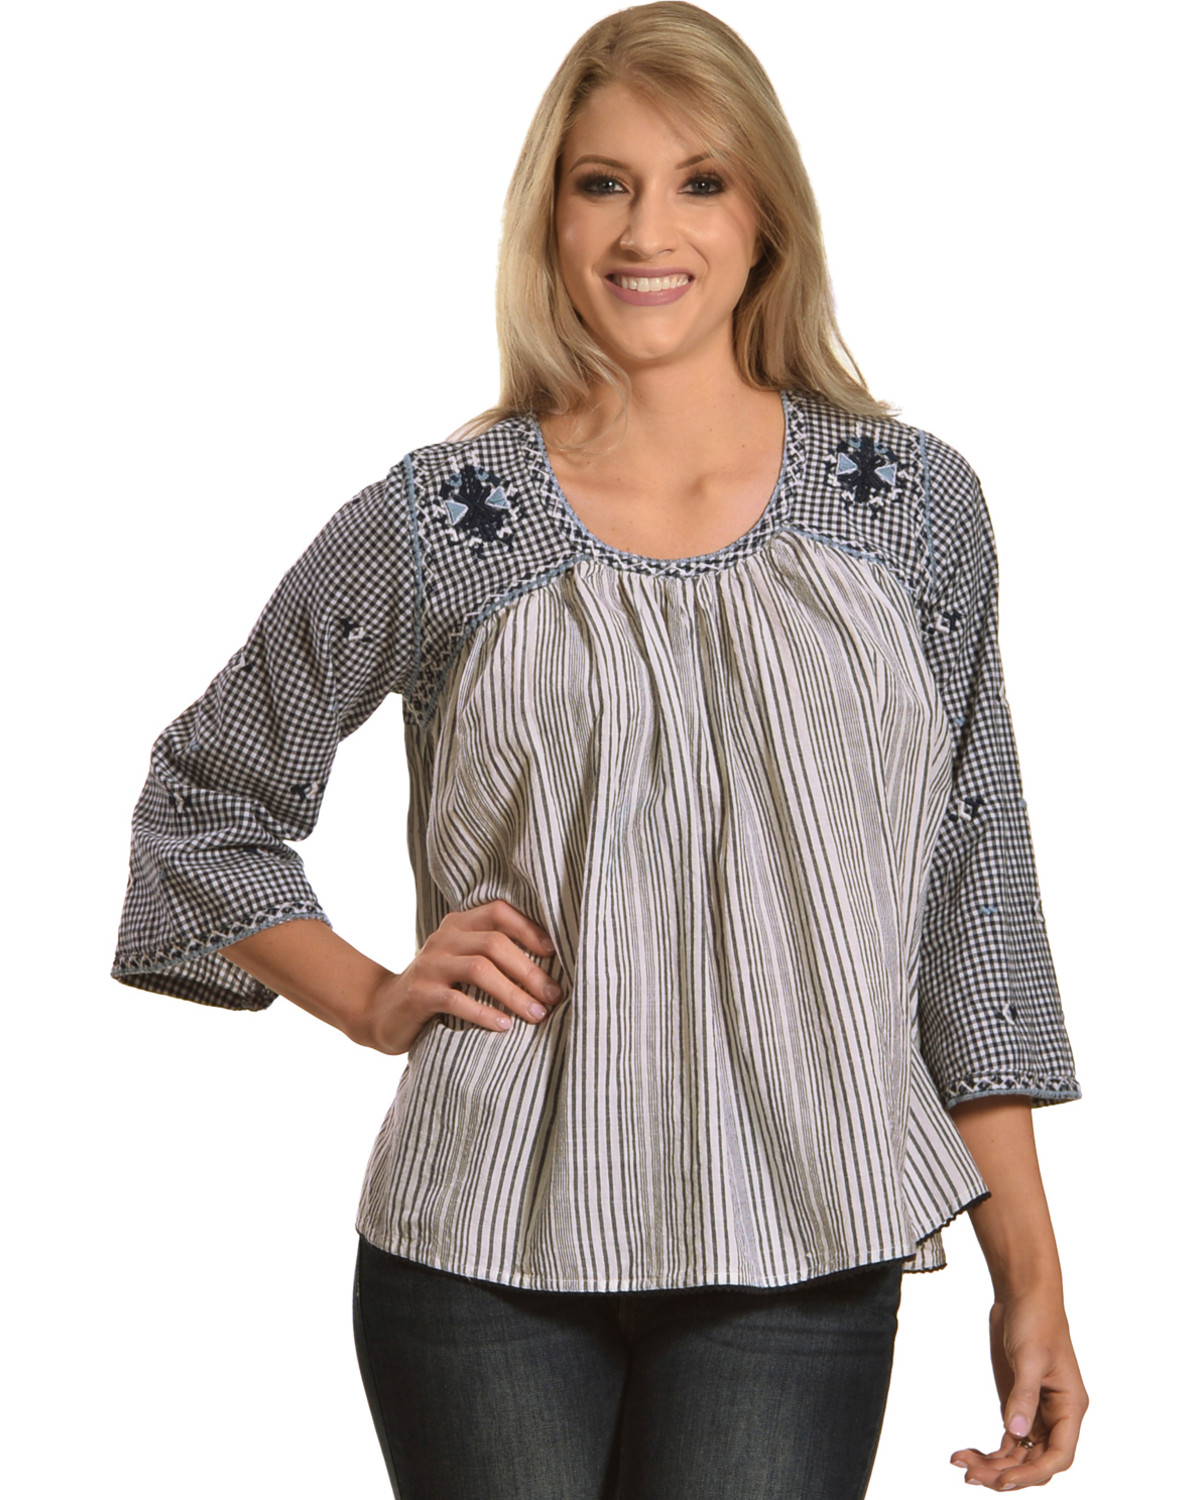 New Direction Sport Women's Embroidered Flare Sleeve Top